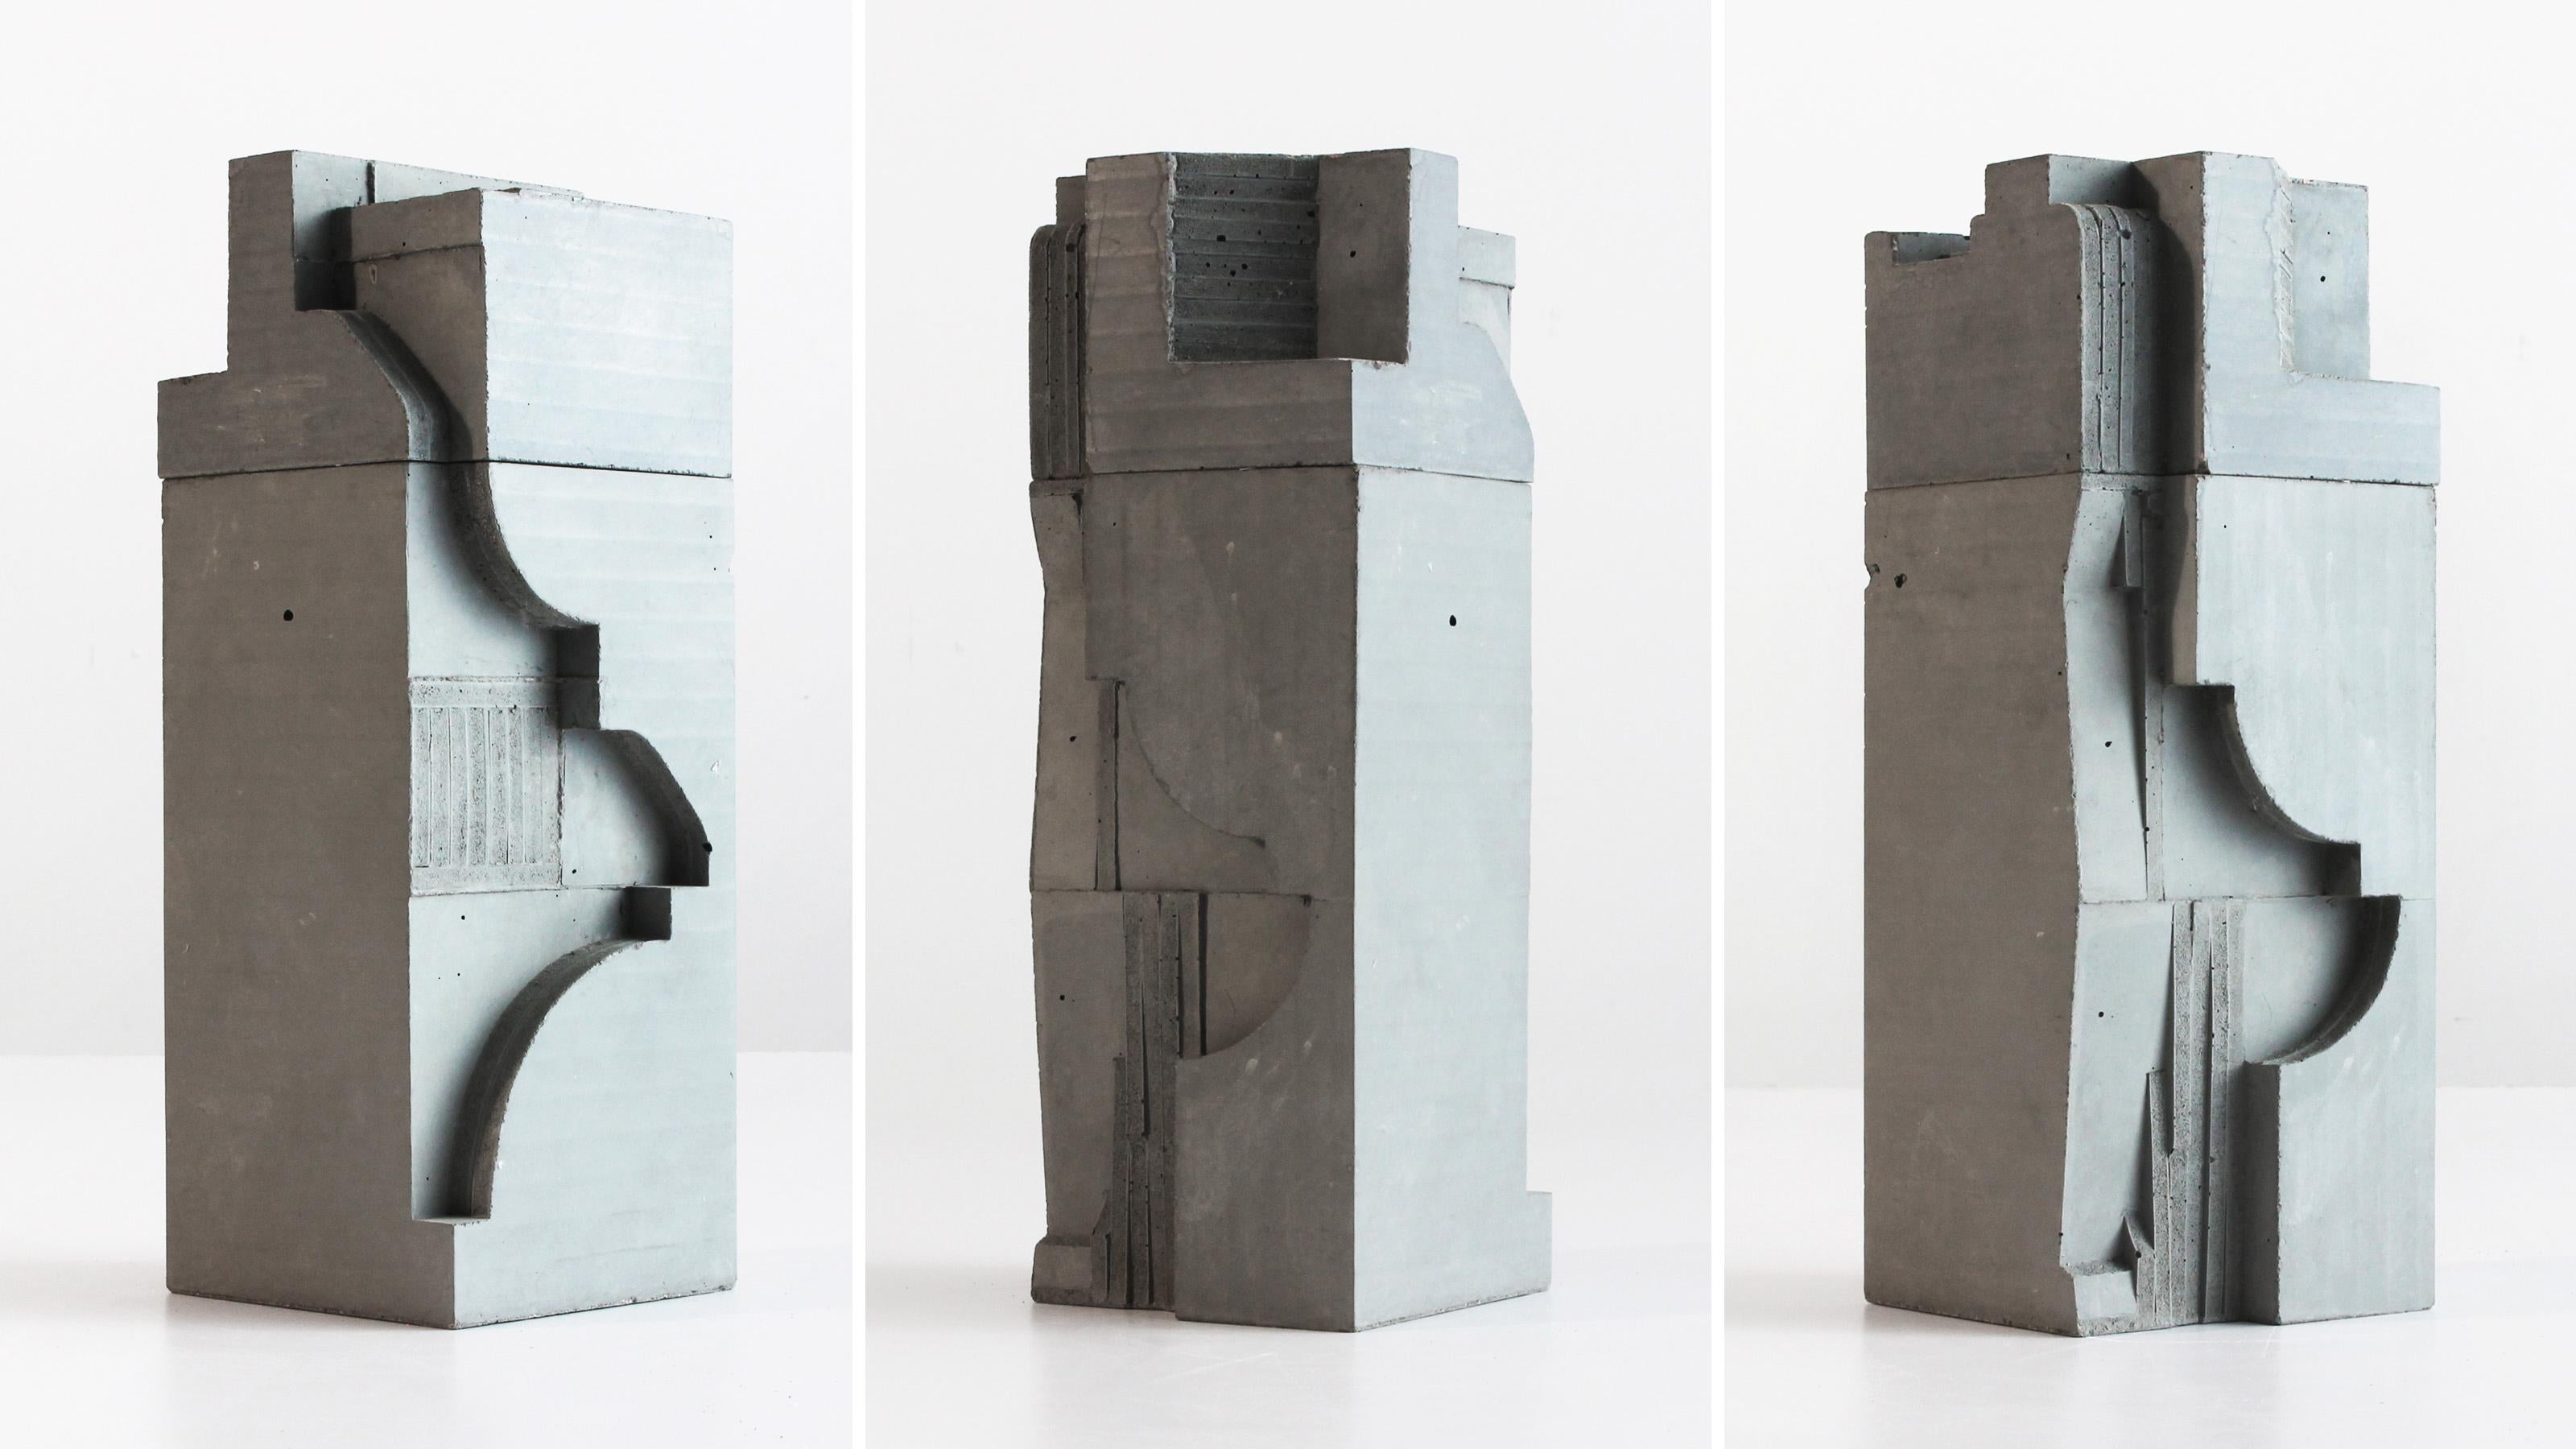 The concrete works of David Umemoto stand as studies about volume. At the juncture of sculpture and architecture, these miniature pieces evoke temporary buildings or monuments standing on far-away lands. The images conveyed in the mind by these